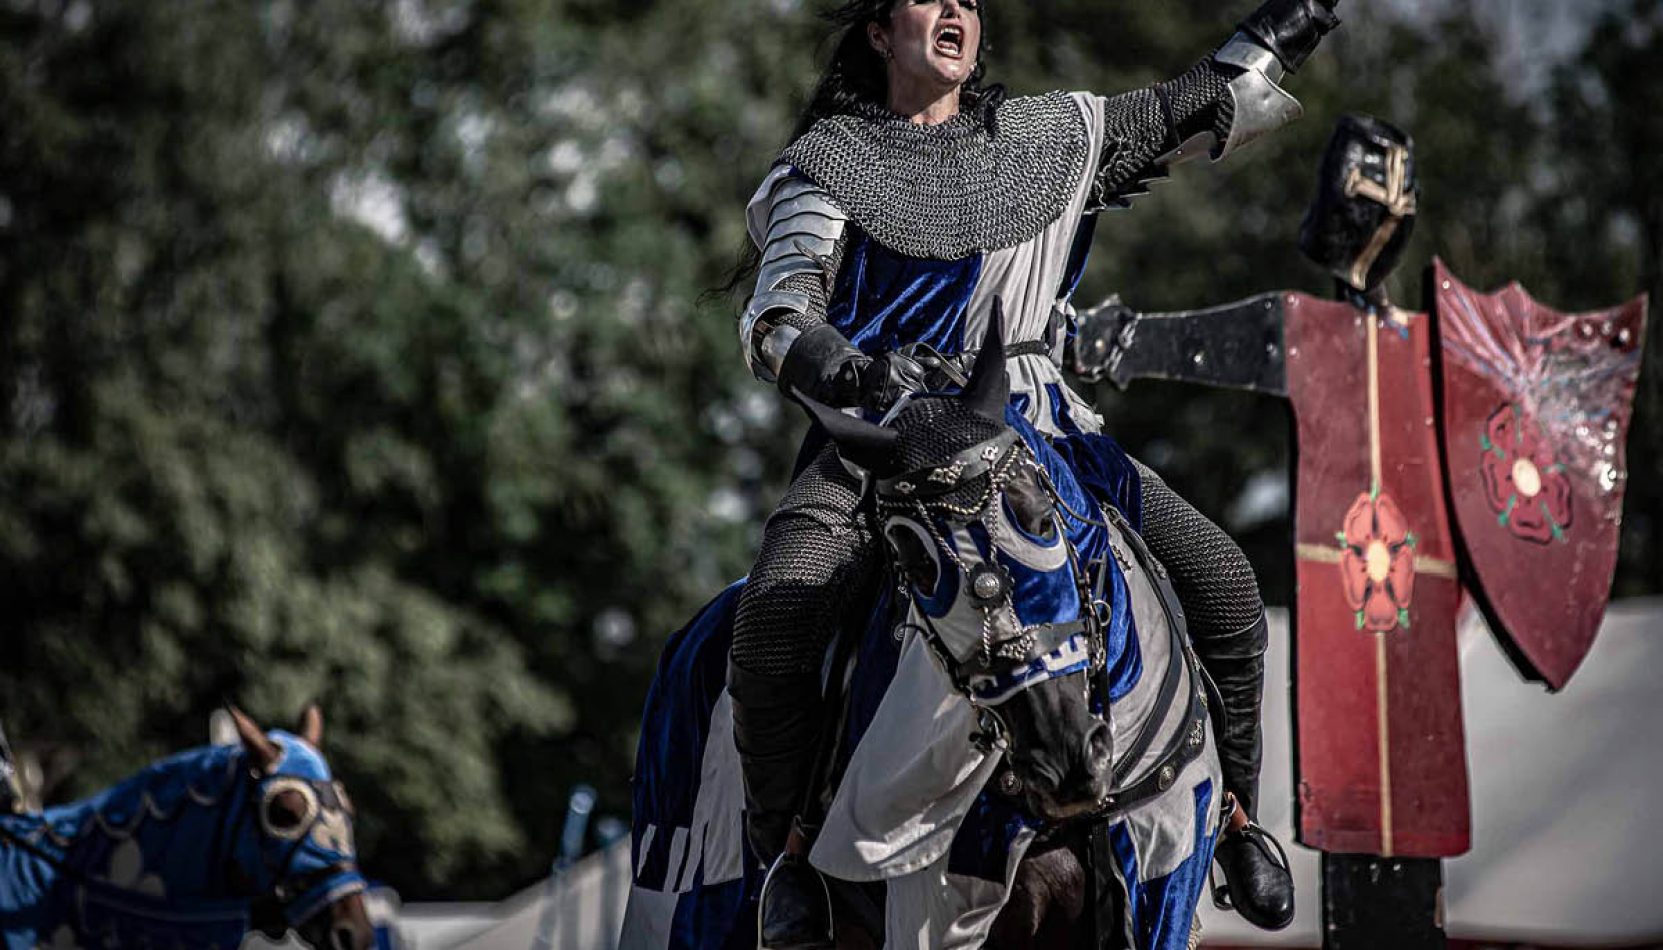 boxwood joust, medieval mayhem, family fun, august 2022, summer holidays, whats on, things to do with the family, family days out, the best family days out in surrey. events in surrey, family events in surrey, whats on, guide to whats on, guide to surrey, guide to family events in surrey